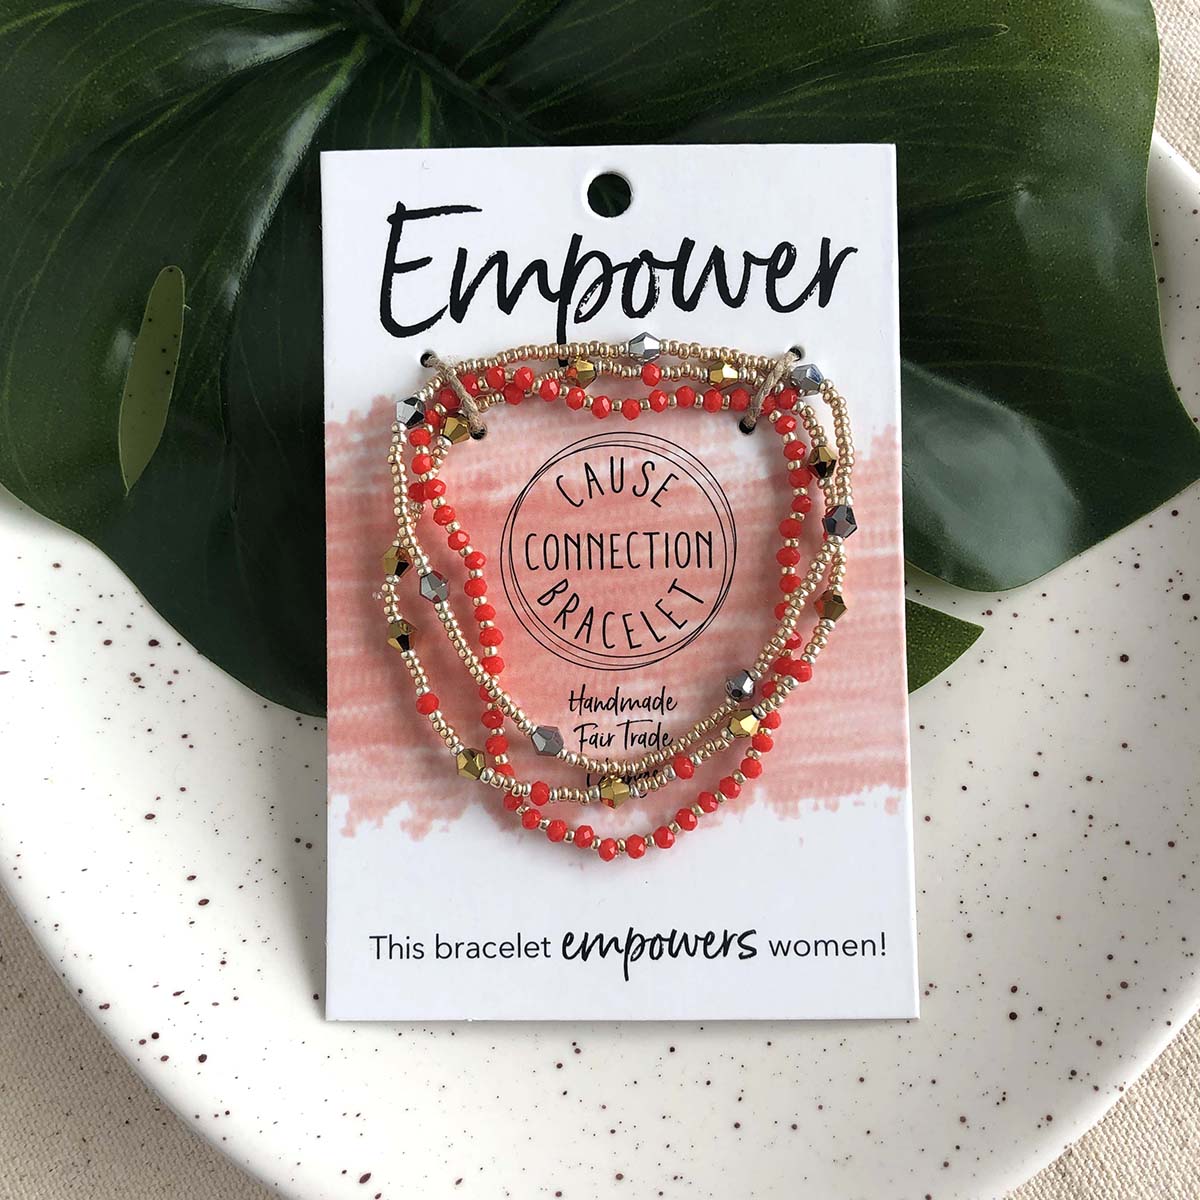 Cause Connection Empower Beaded Bracelet